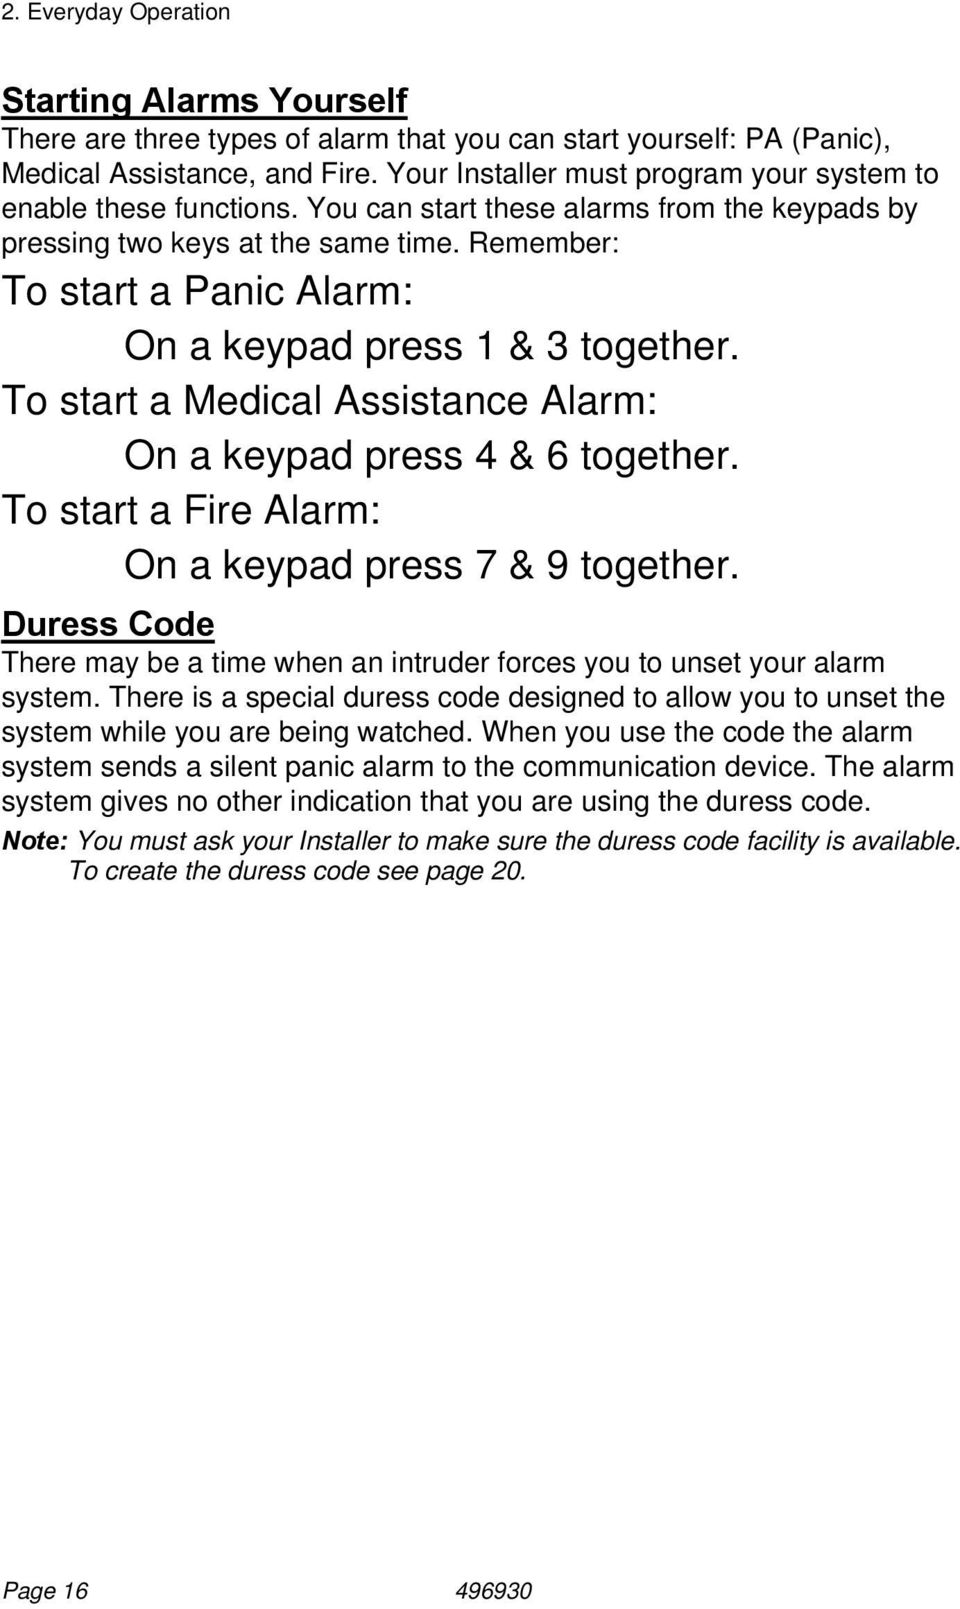 Remember: To start a Panic Alarm: On a keypad press 1 & 3 together. To start a Medical Assistance Alarm: On a keypad press 4 & 6 together. To start a Fire Alarm: On a keypad press 7 & 9 together.